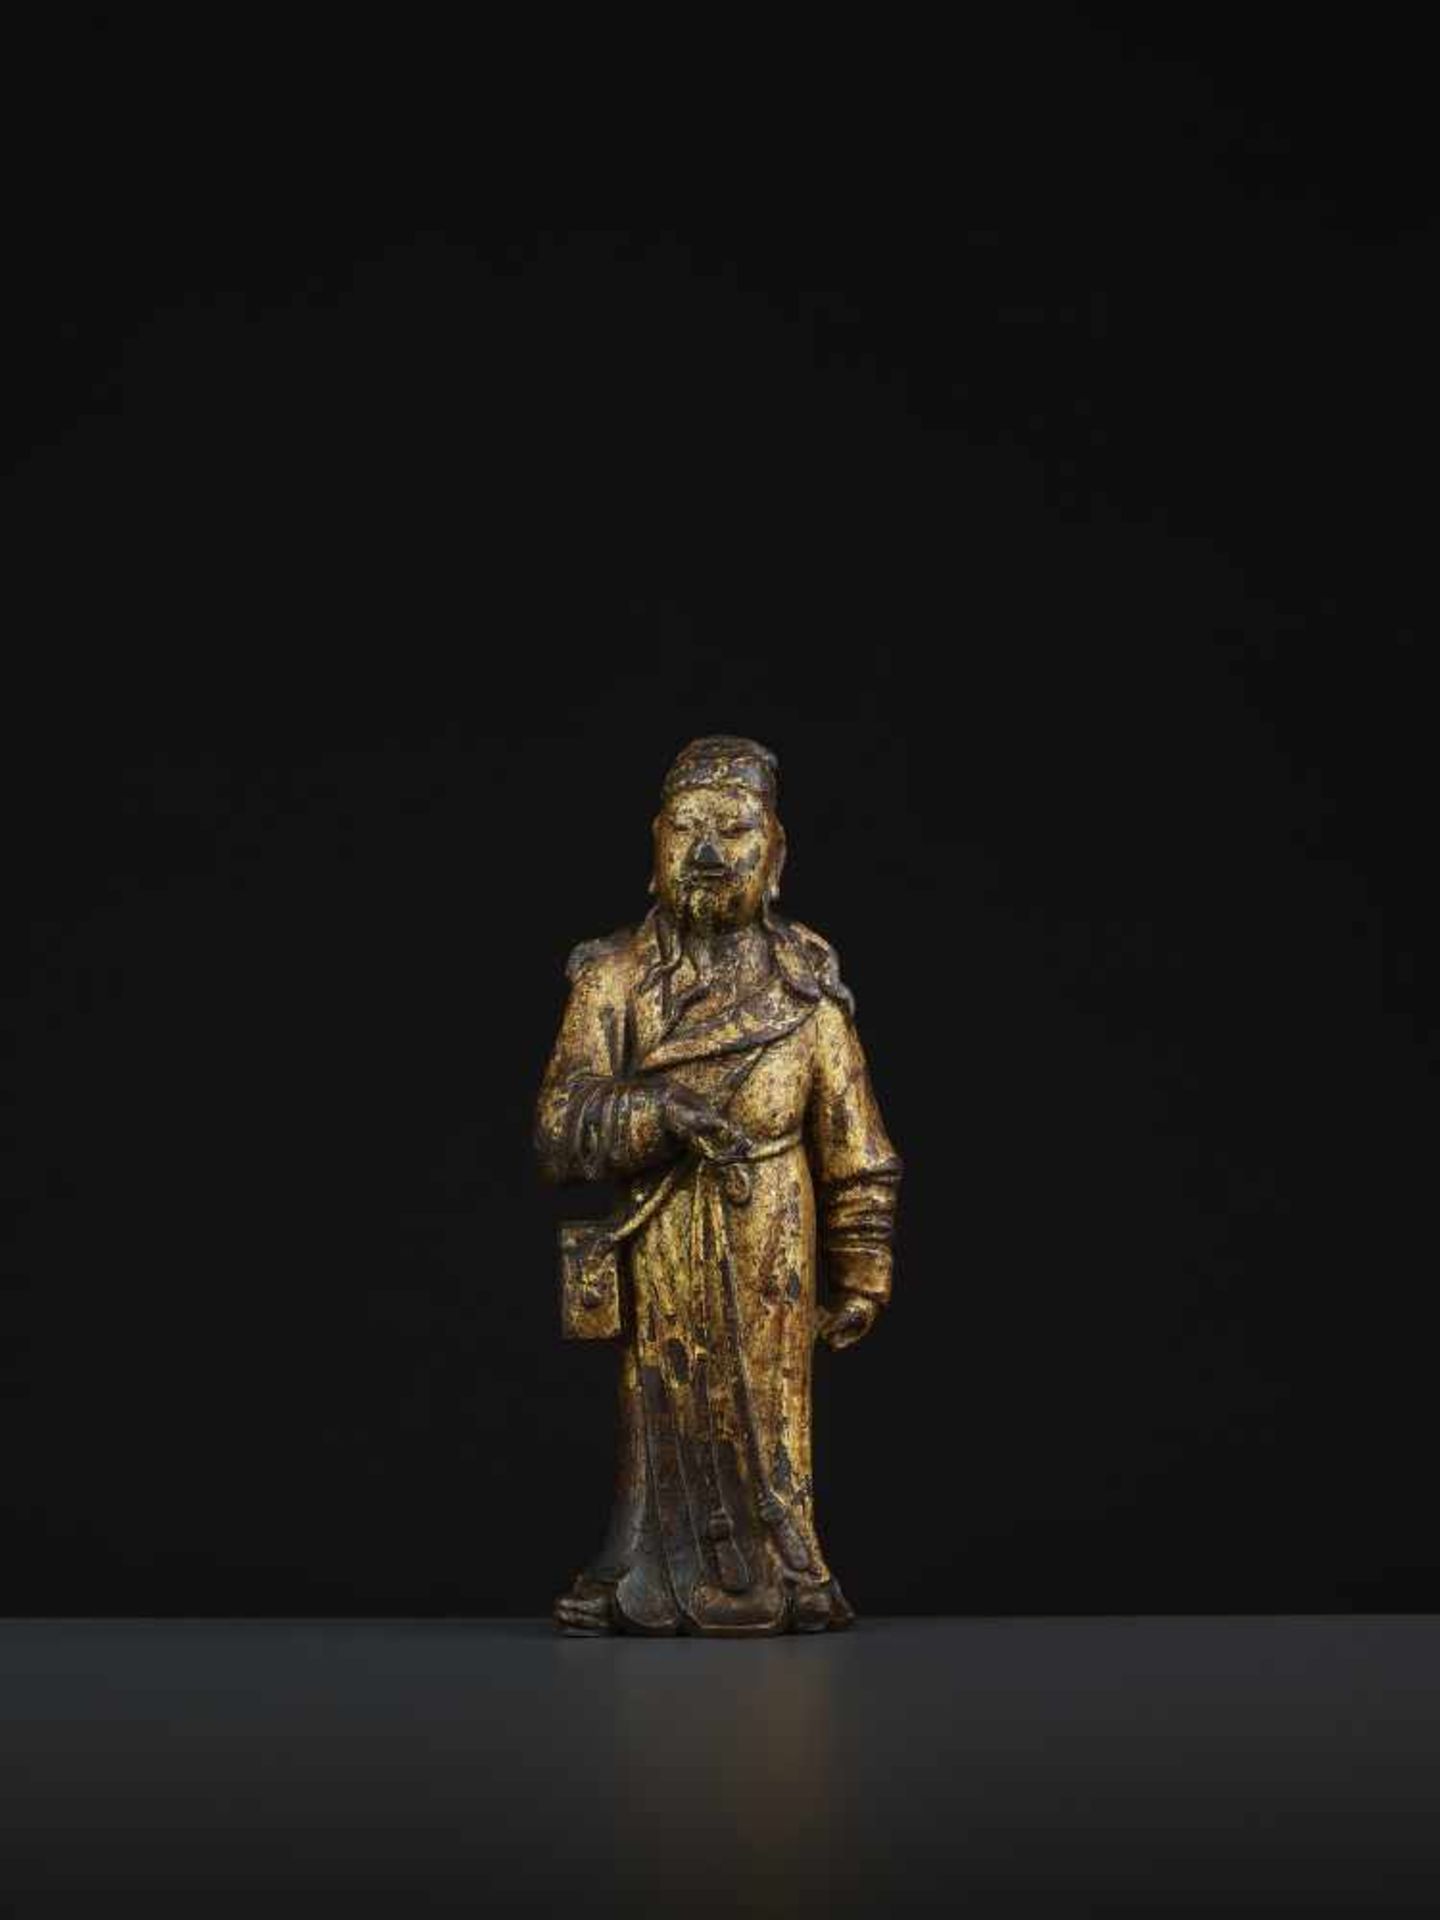 A MING DAOIST IMMORTAL BRONZEChina 16th - 17th century. The bronze with a rich gold lacquer coating.